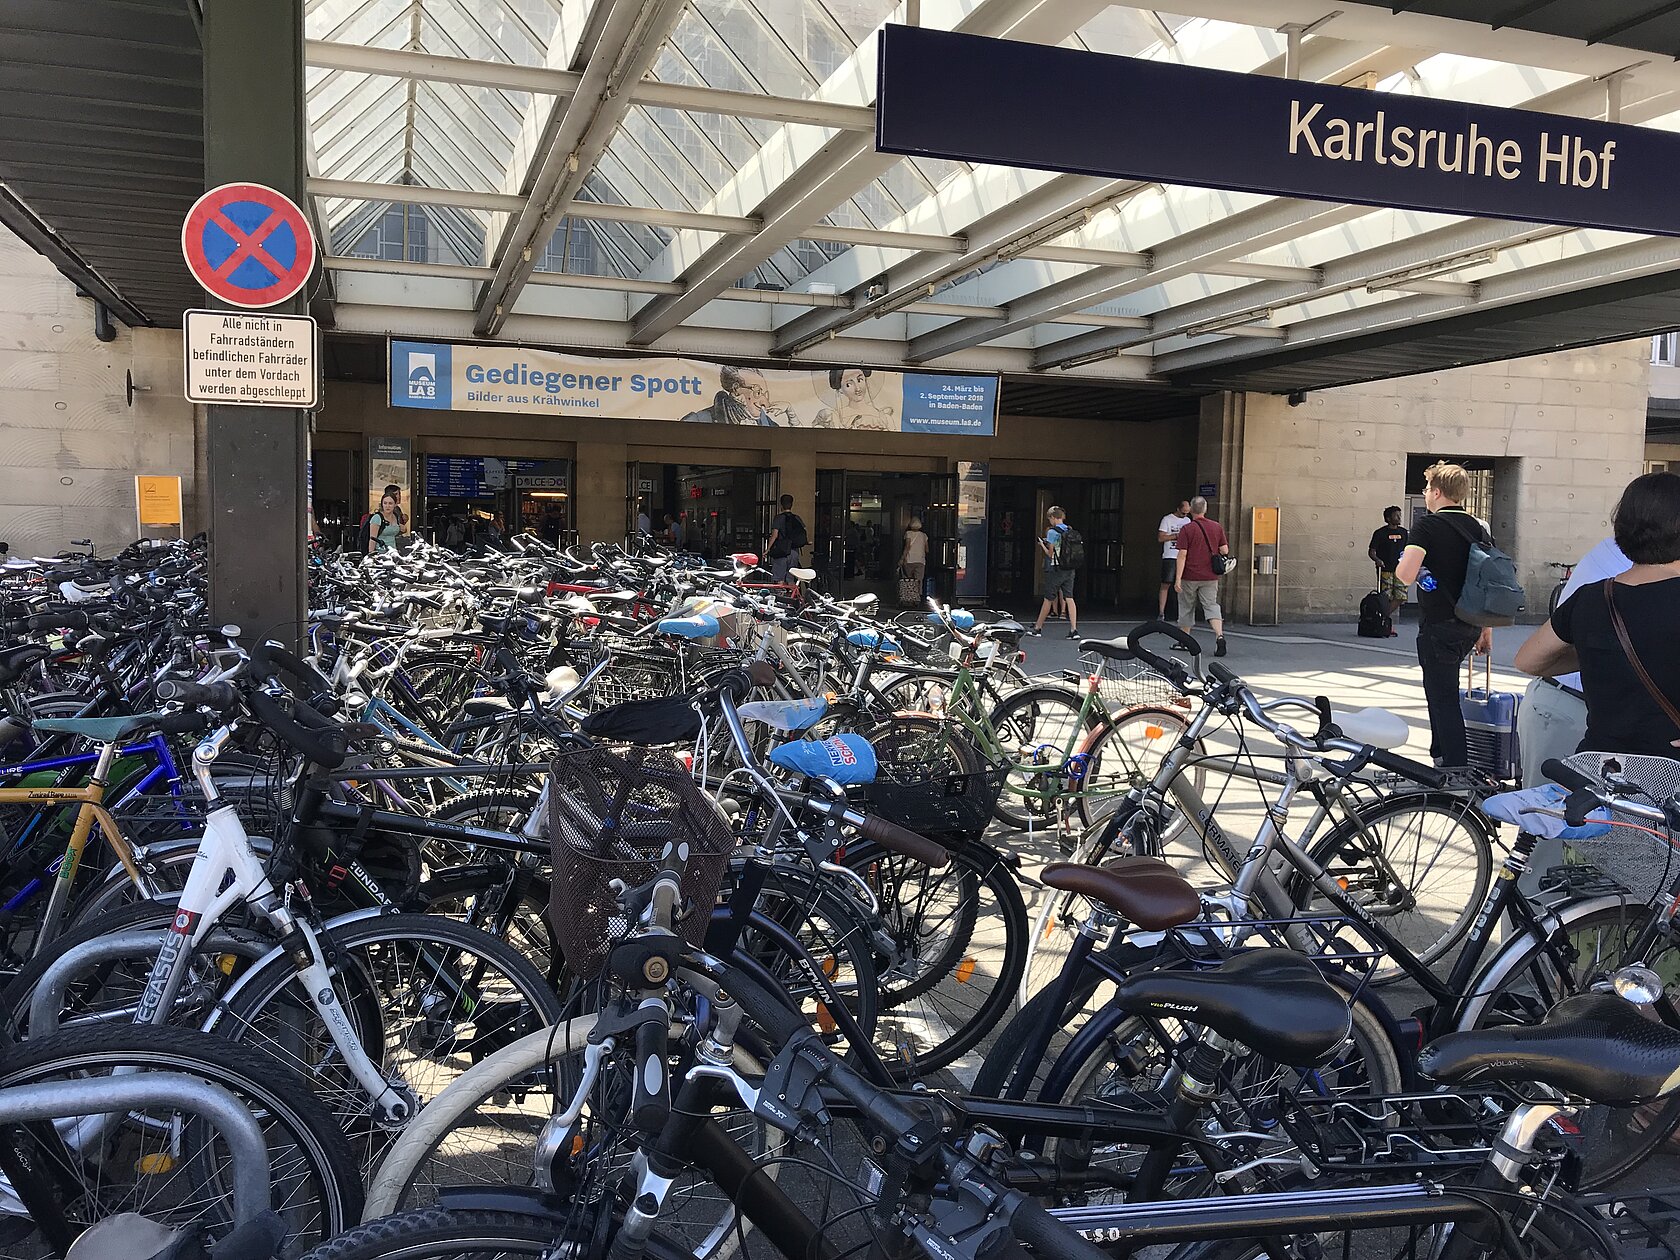 Pile of bikes parked in front of the Karlsruhe Main Station